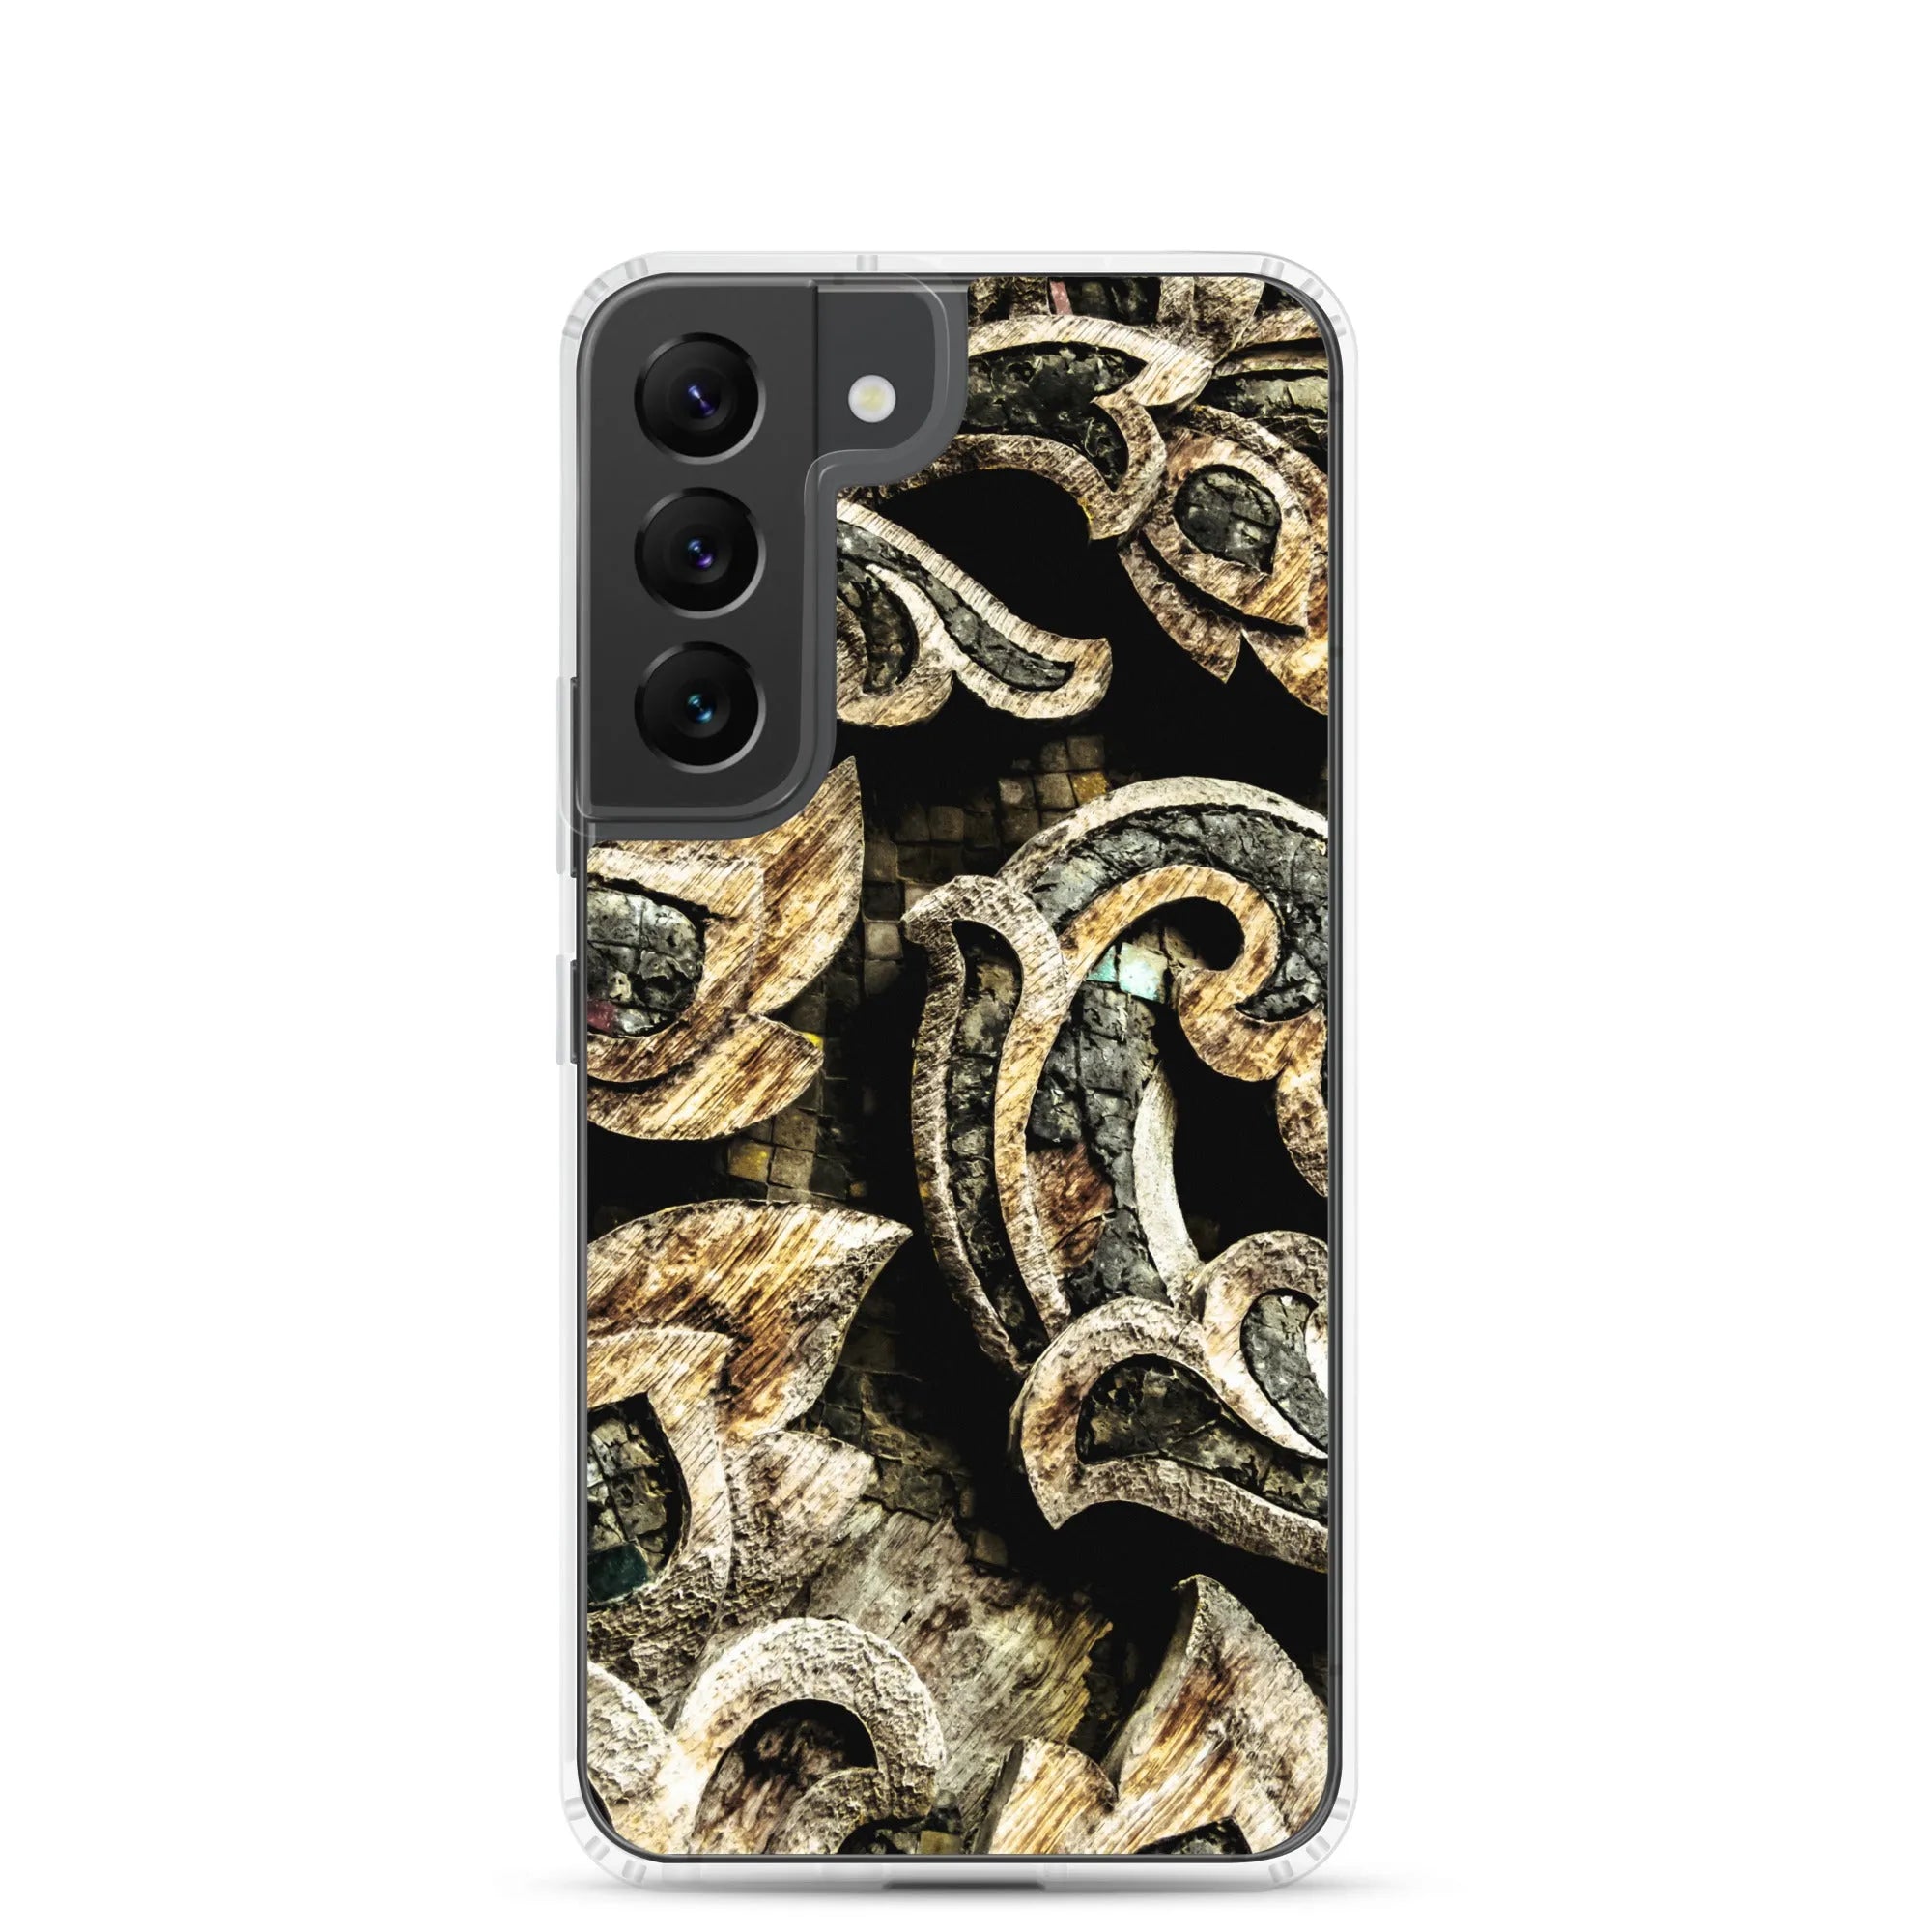 Against The Grain Samsung Galaxy Case - Samsung Galaxy S22 - Mobile Phone Cases - Aesthetic Art